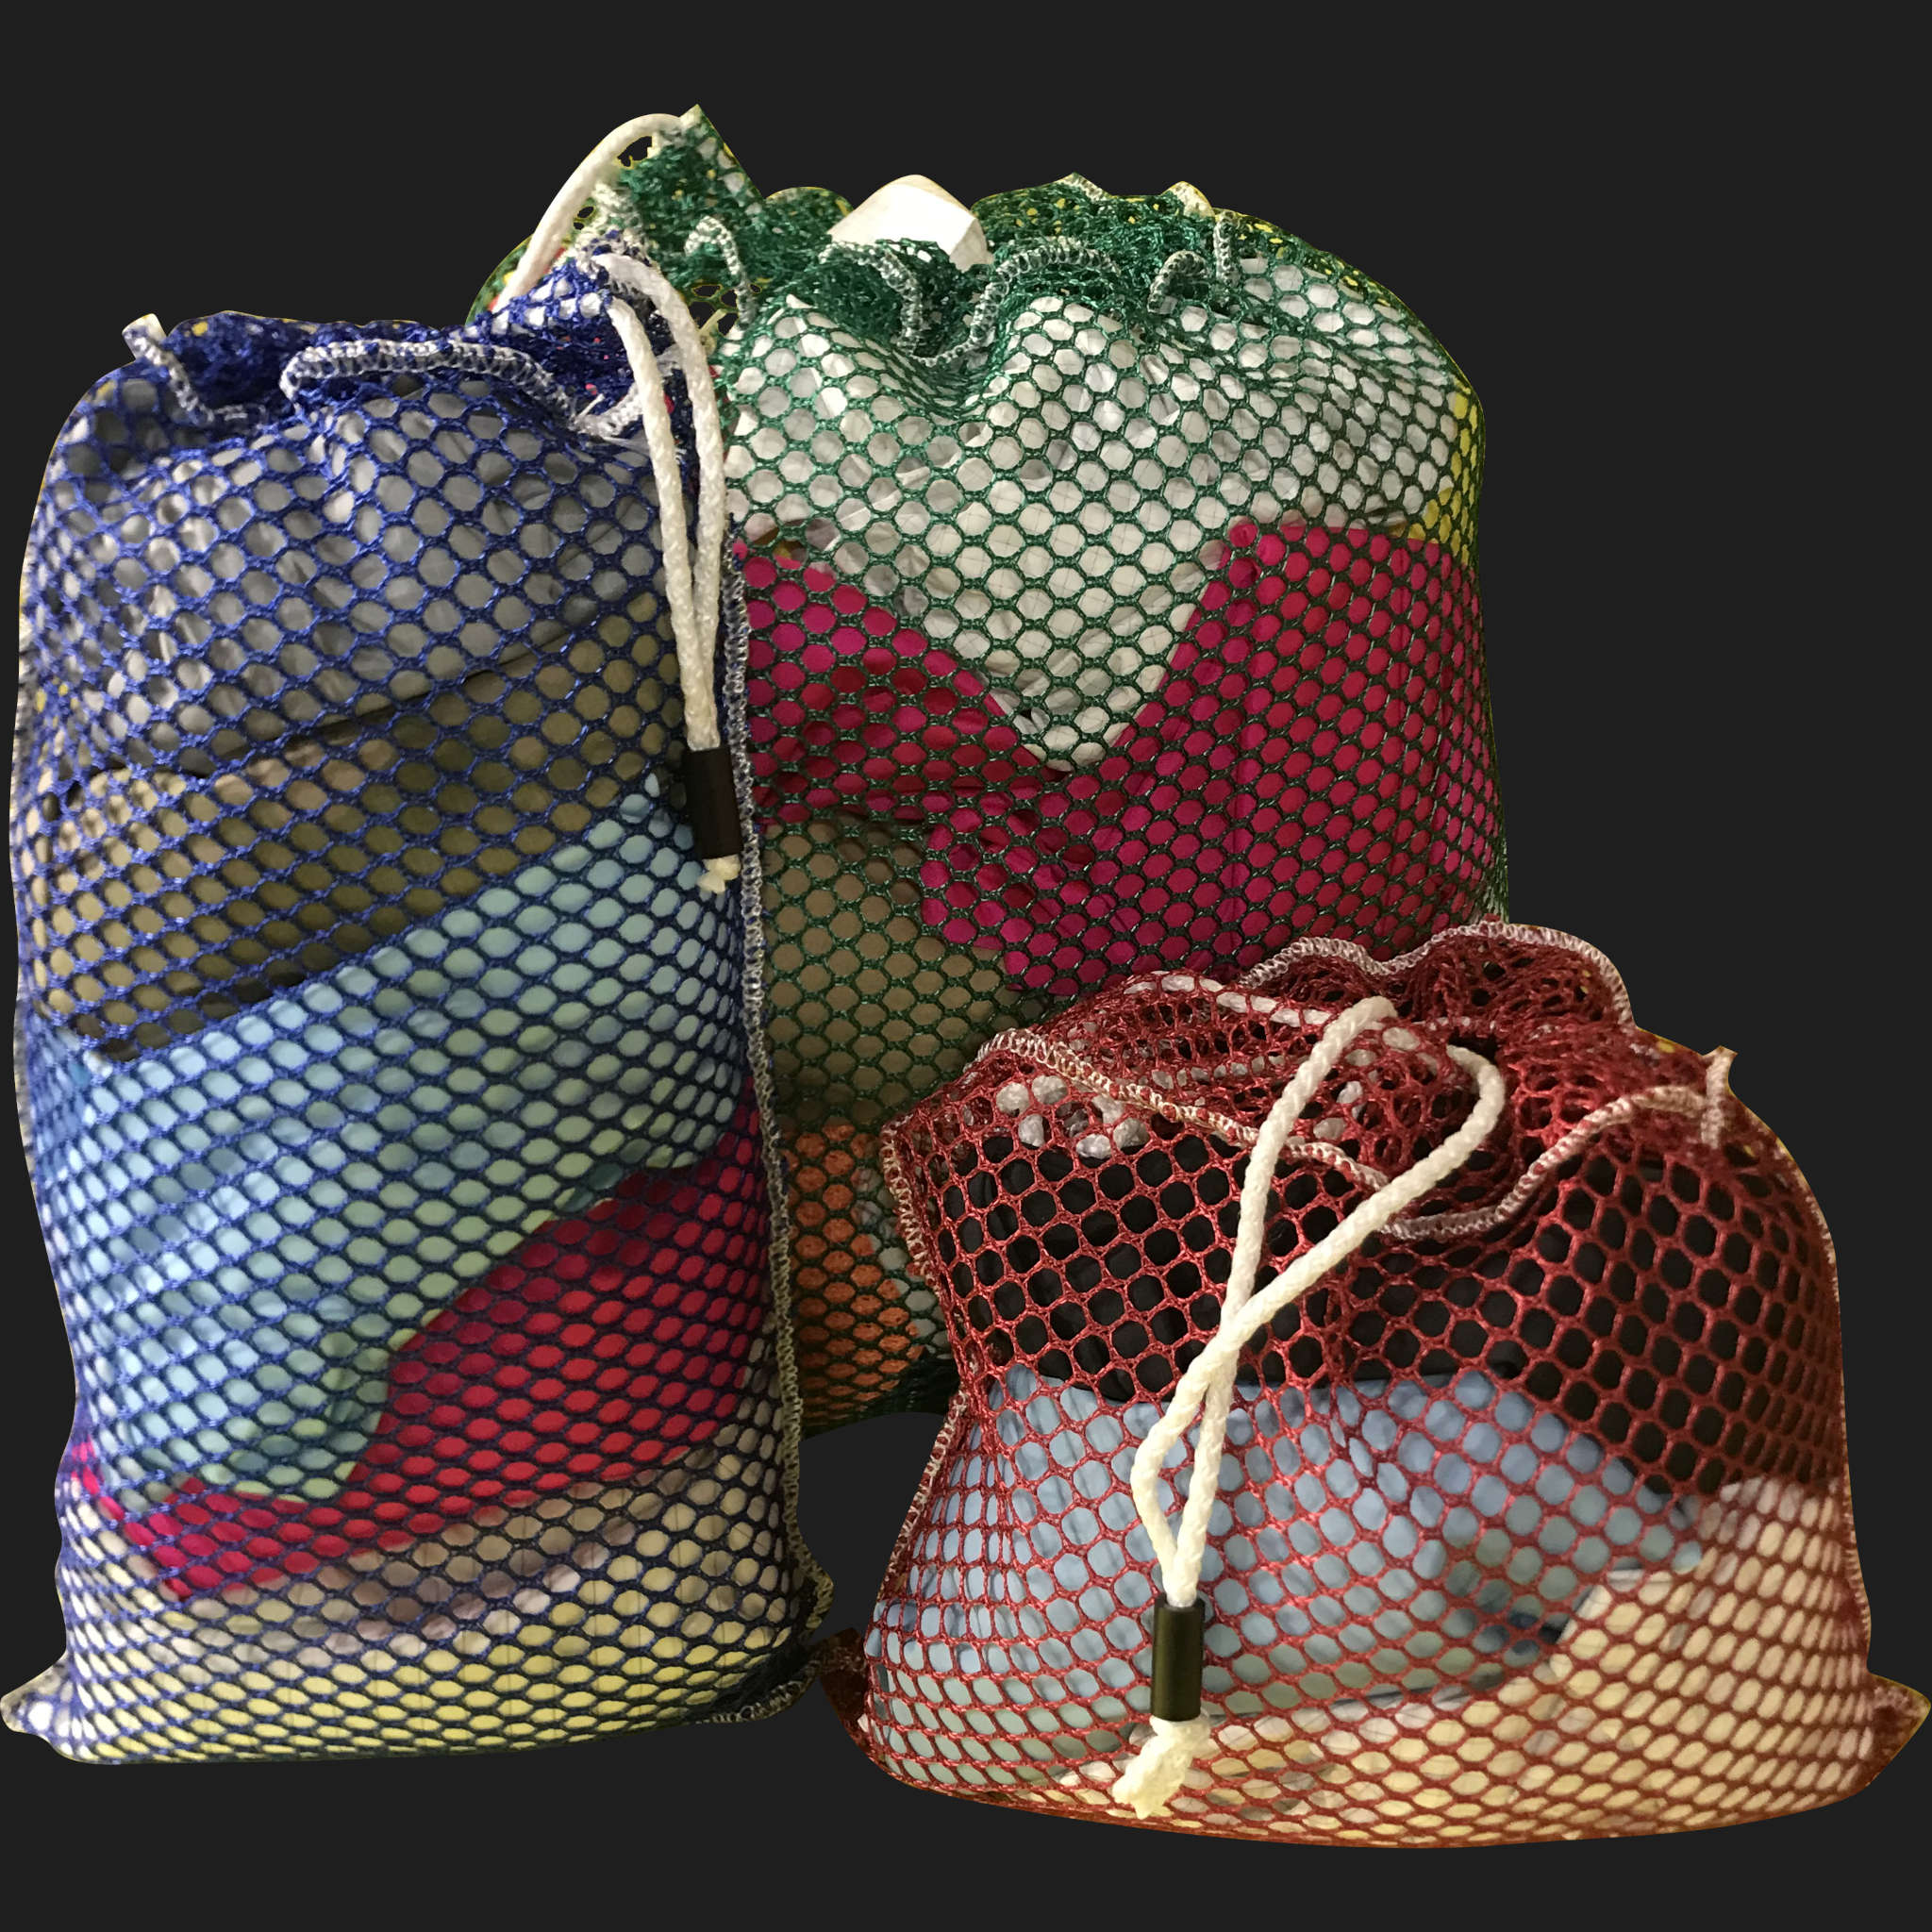 56" x 82" Customized Mesh-Net-Laundry Bags Heavy Duty with Cord and barrellock closure